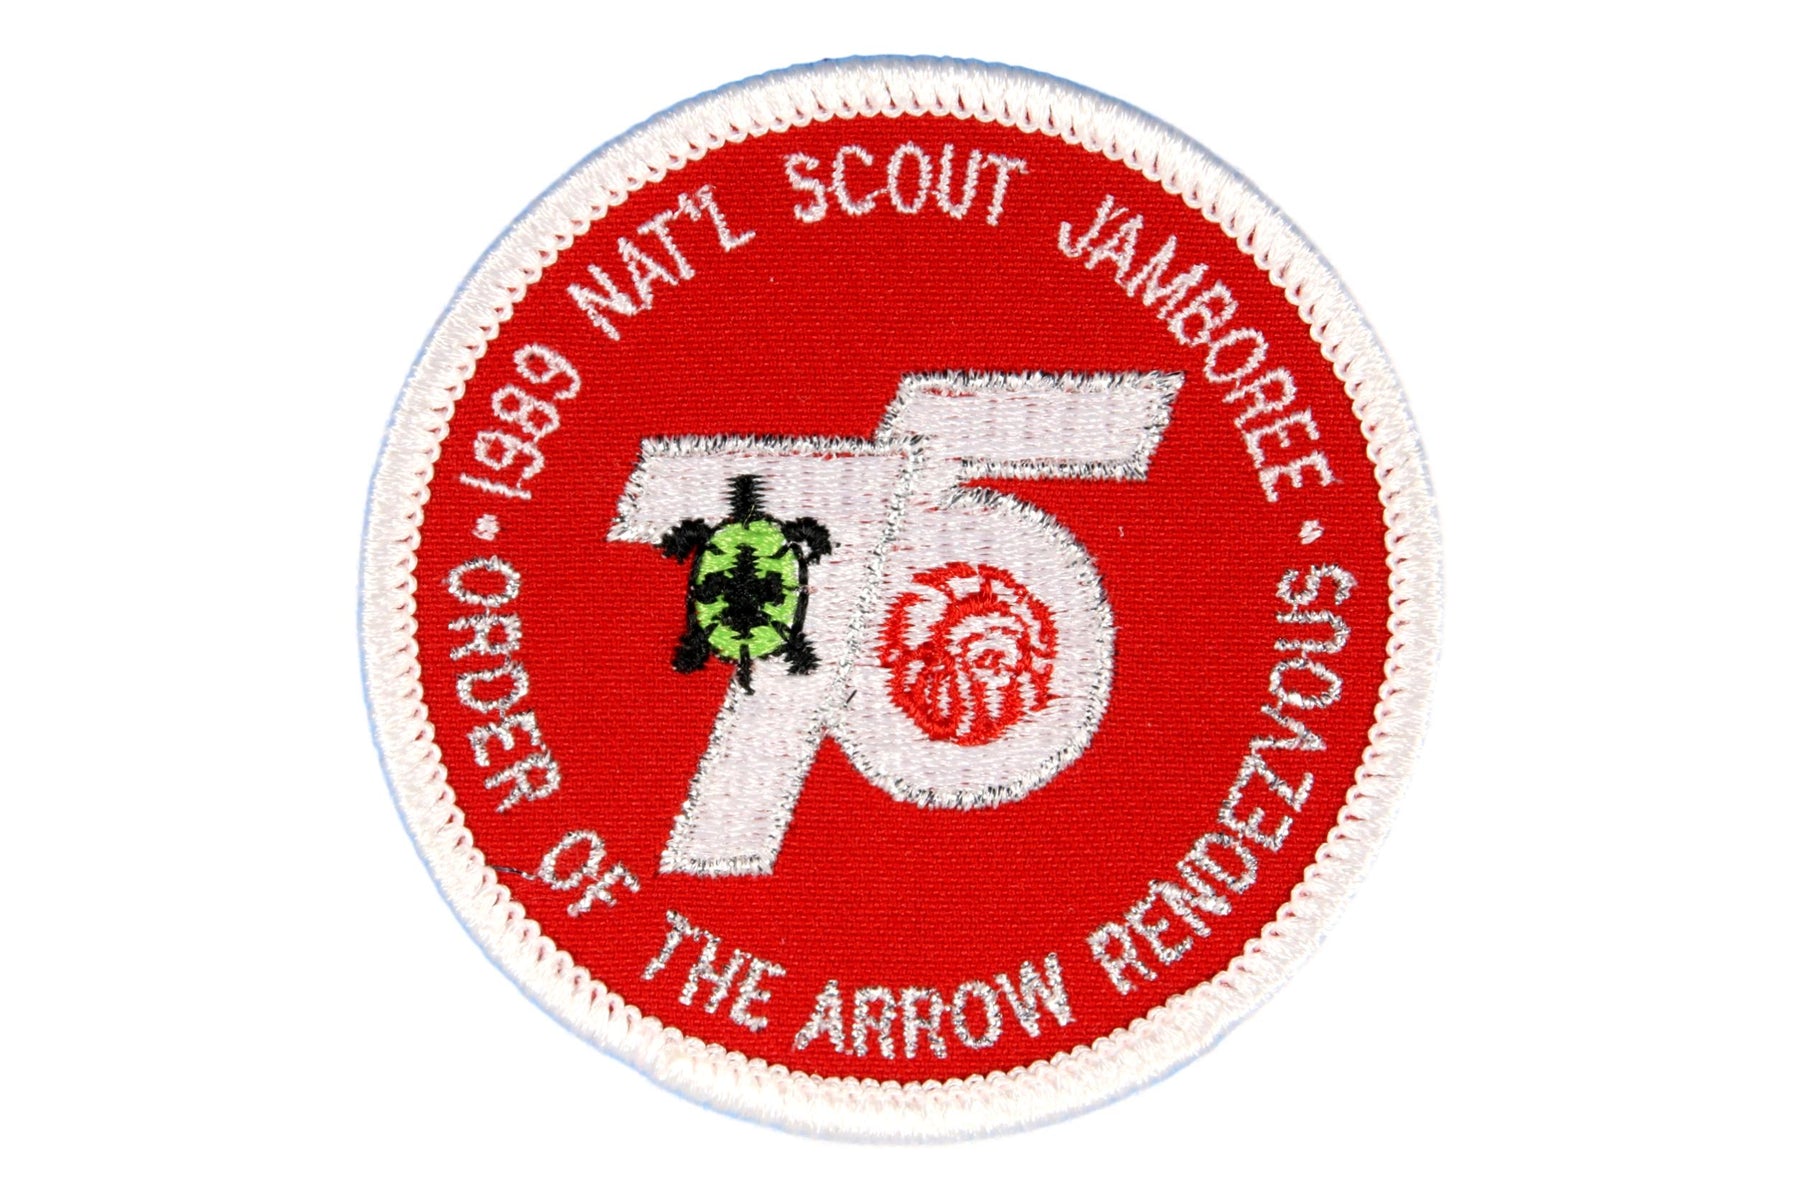 1989 NJ Order of the Arrow Rendezvous Patch